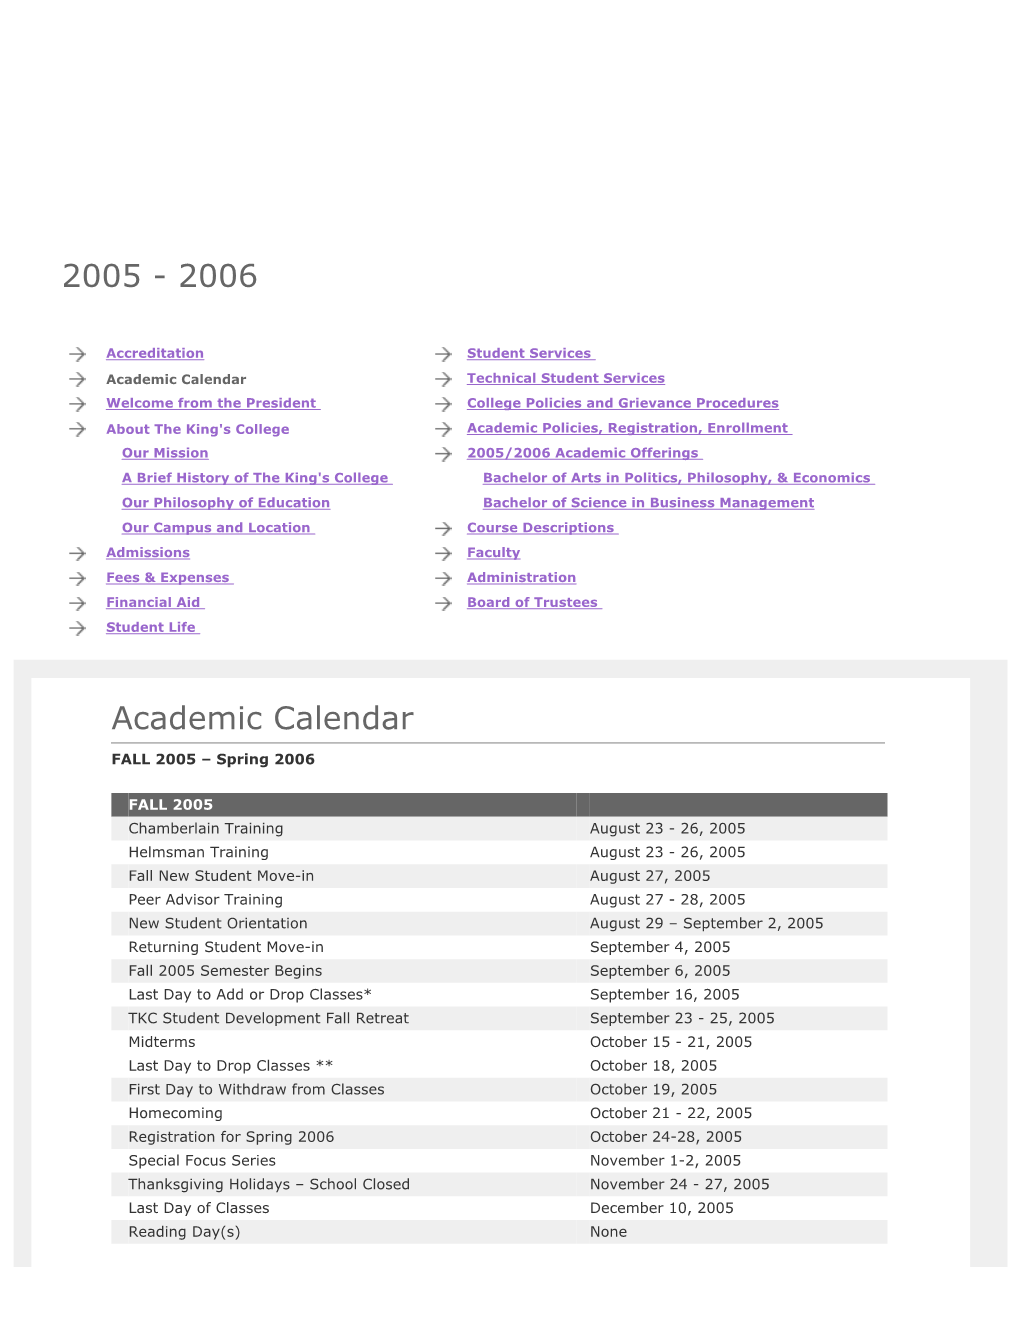 Academic Catalog 2004/2005: Our Mission